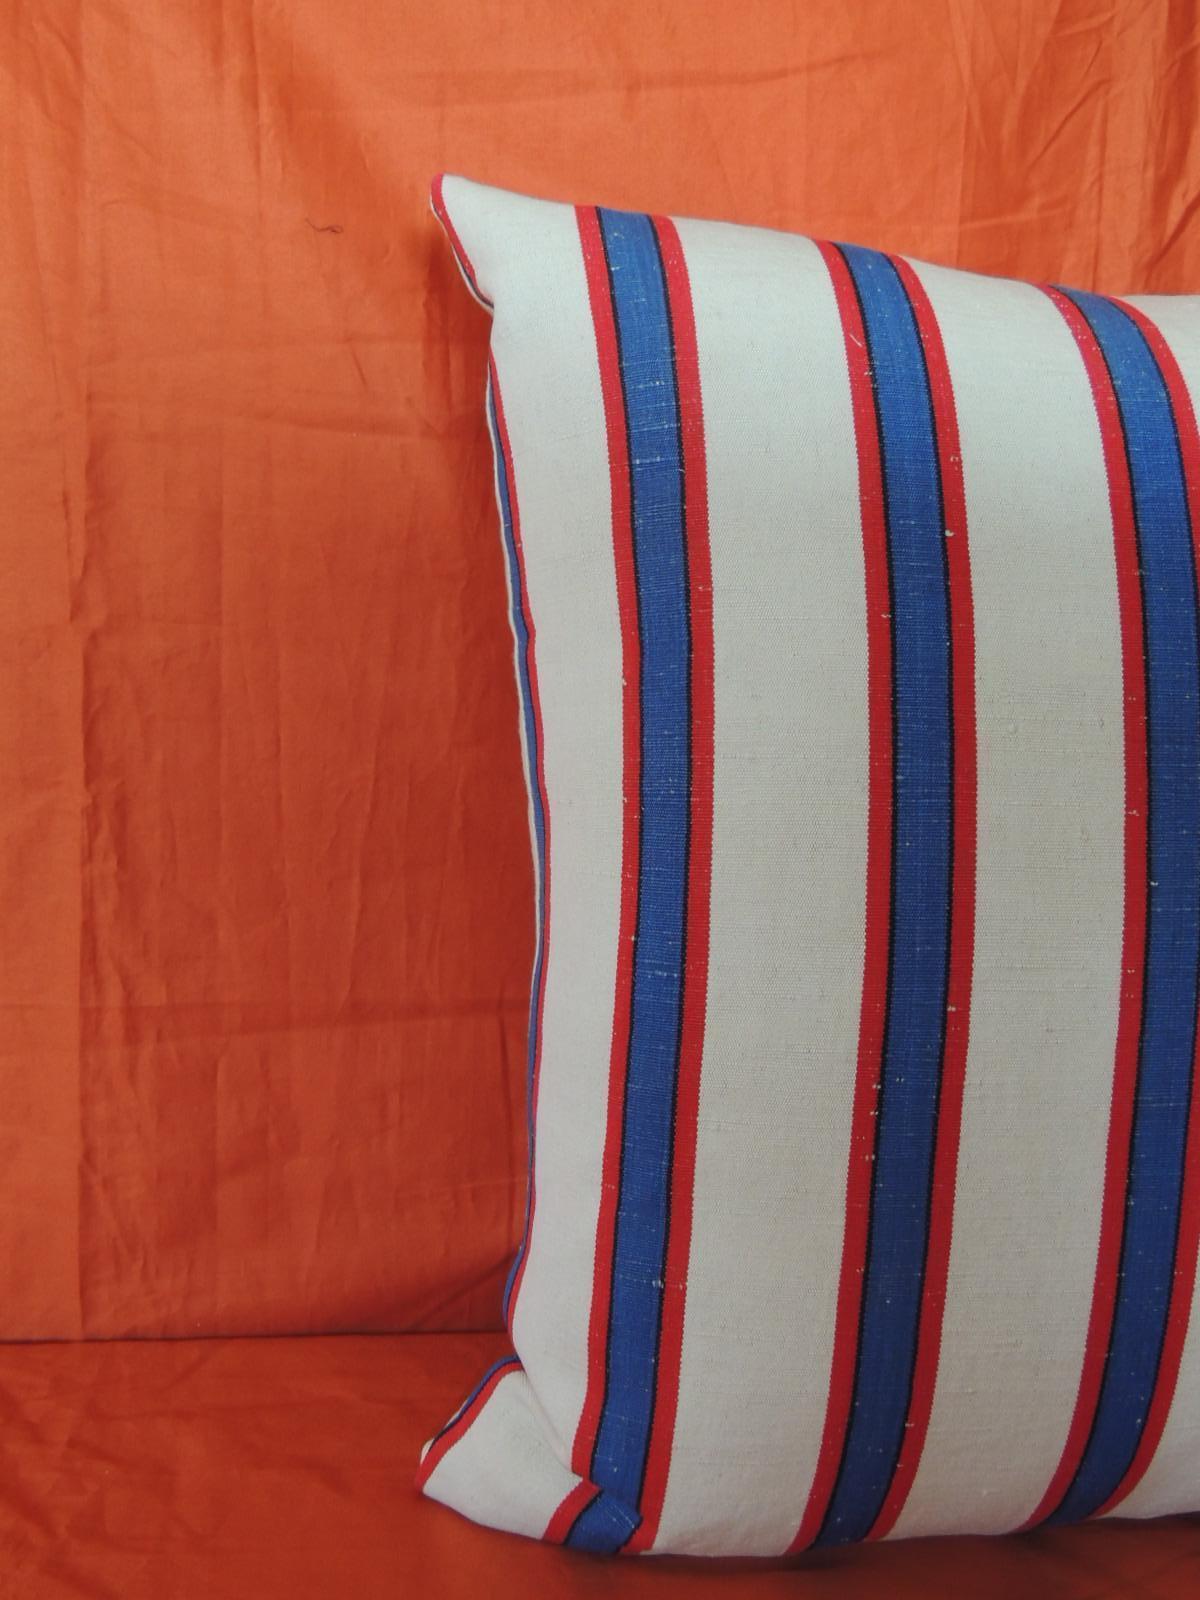 1940s French awning stripes linen pillow in red, blue and natural with natural linen backing.
Pillow handmade and designed in the USA. Closure by stitch (no zipper) with custom made pillow insert.
Size: 19 x 19 x 6.